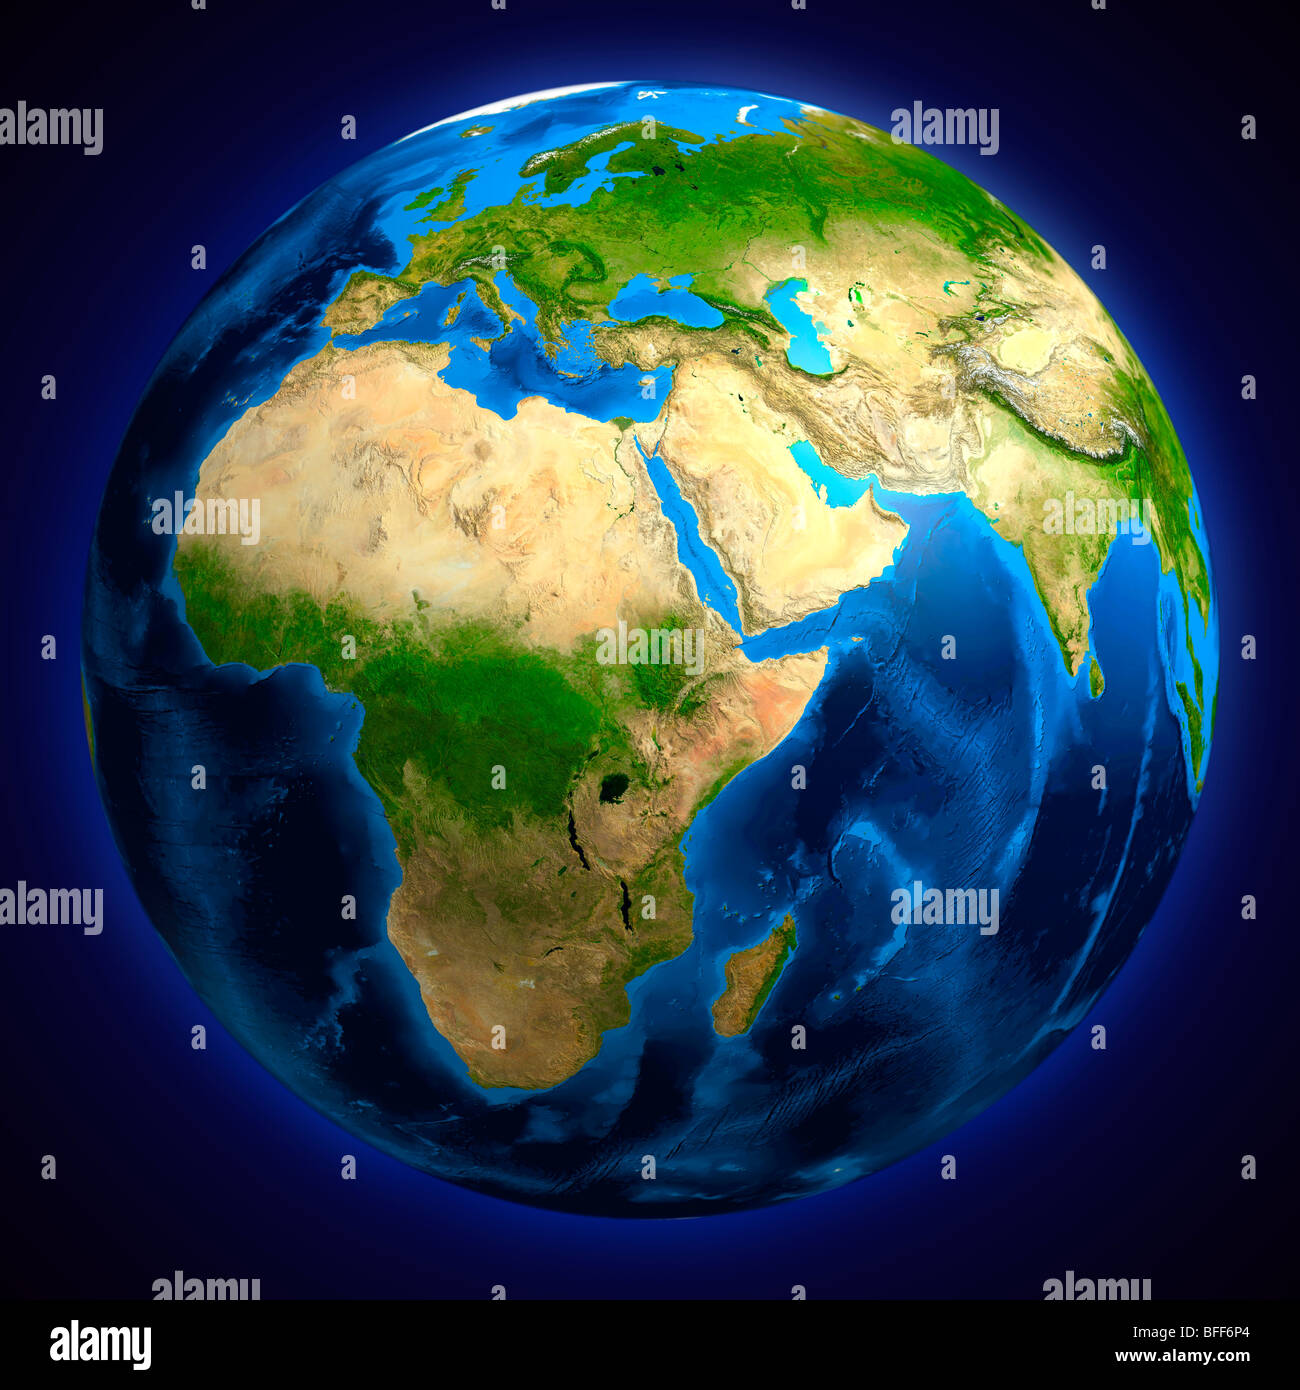 View of the Earth globe from space showing African, European and Asian continents Stock Photo